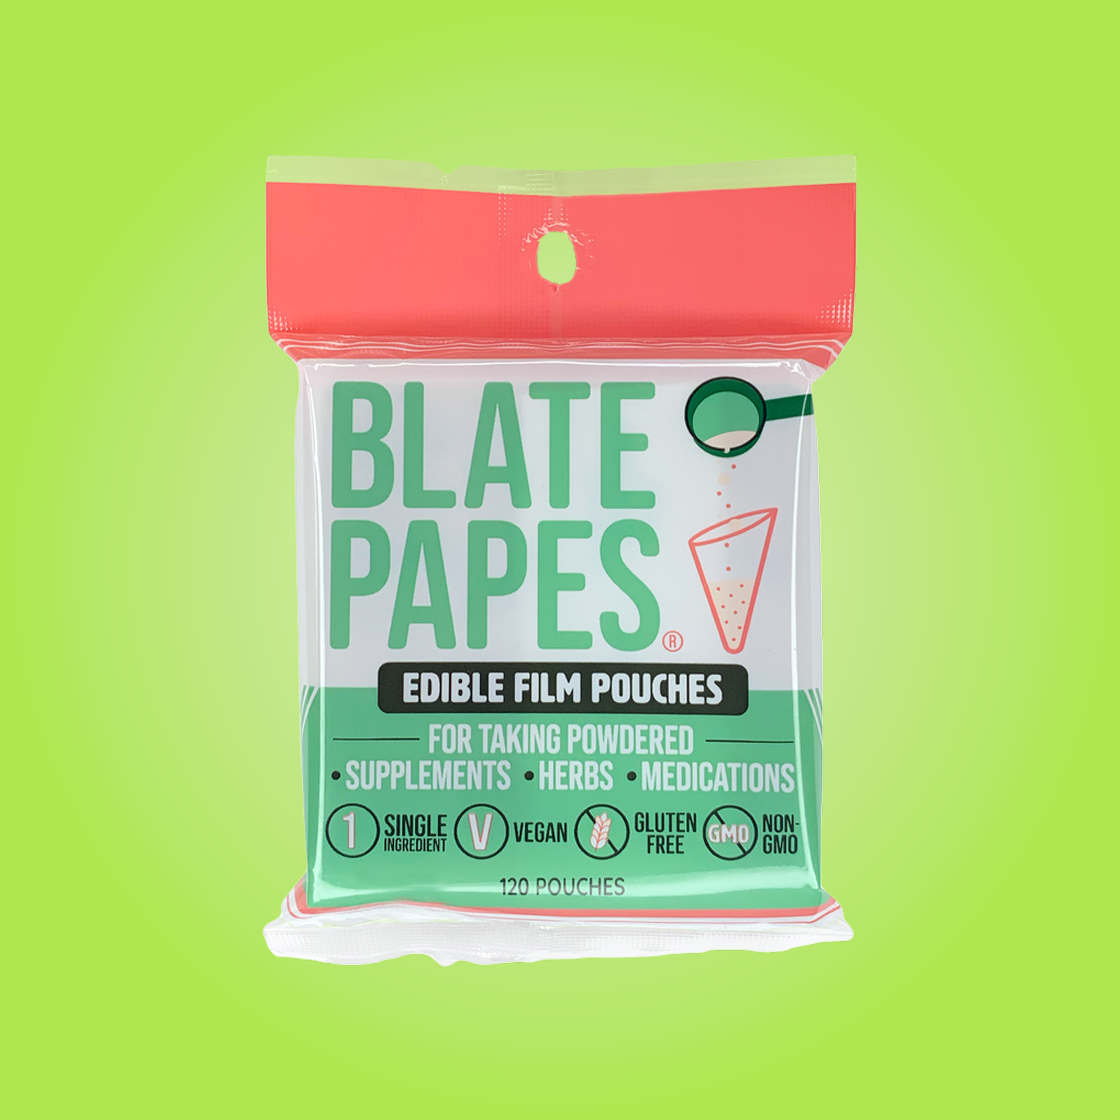 Featured image depicting a branded packet of Blate Papes, Edible Film Pouches for powdered kratom and other botanical supplements. 120 pouches per packet.